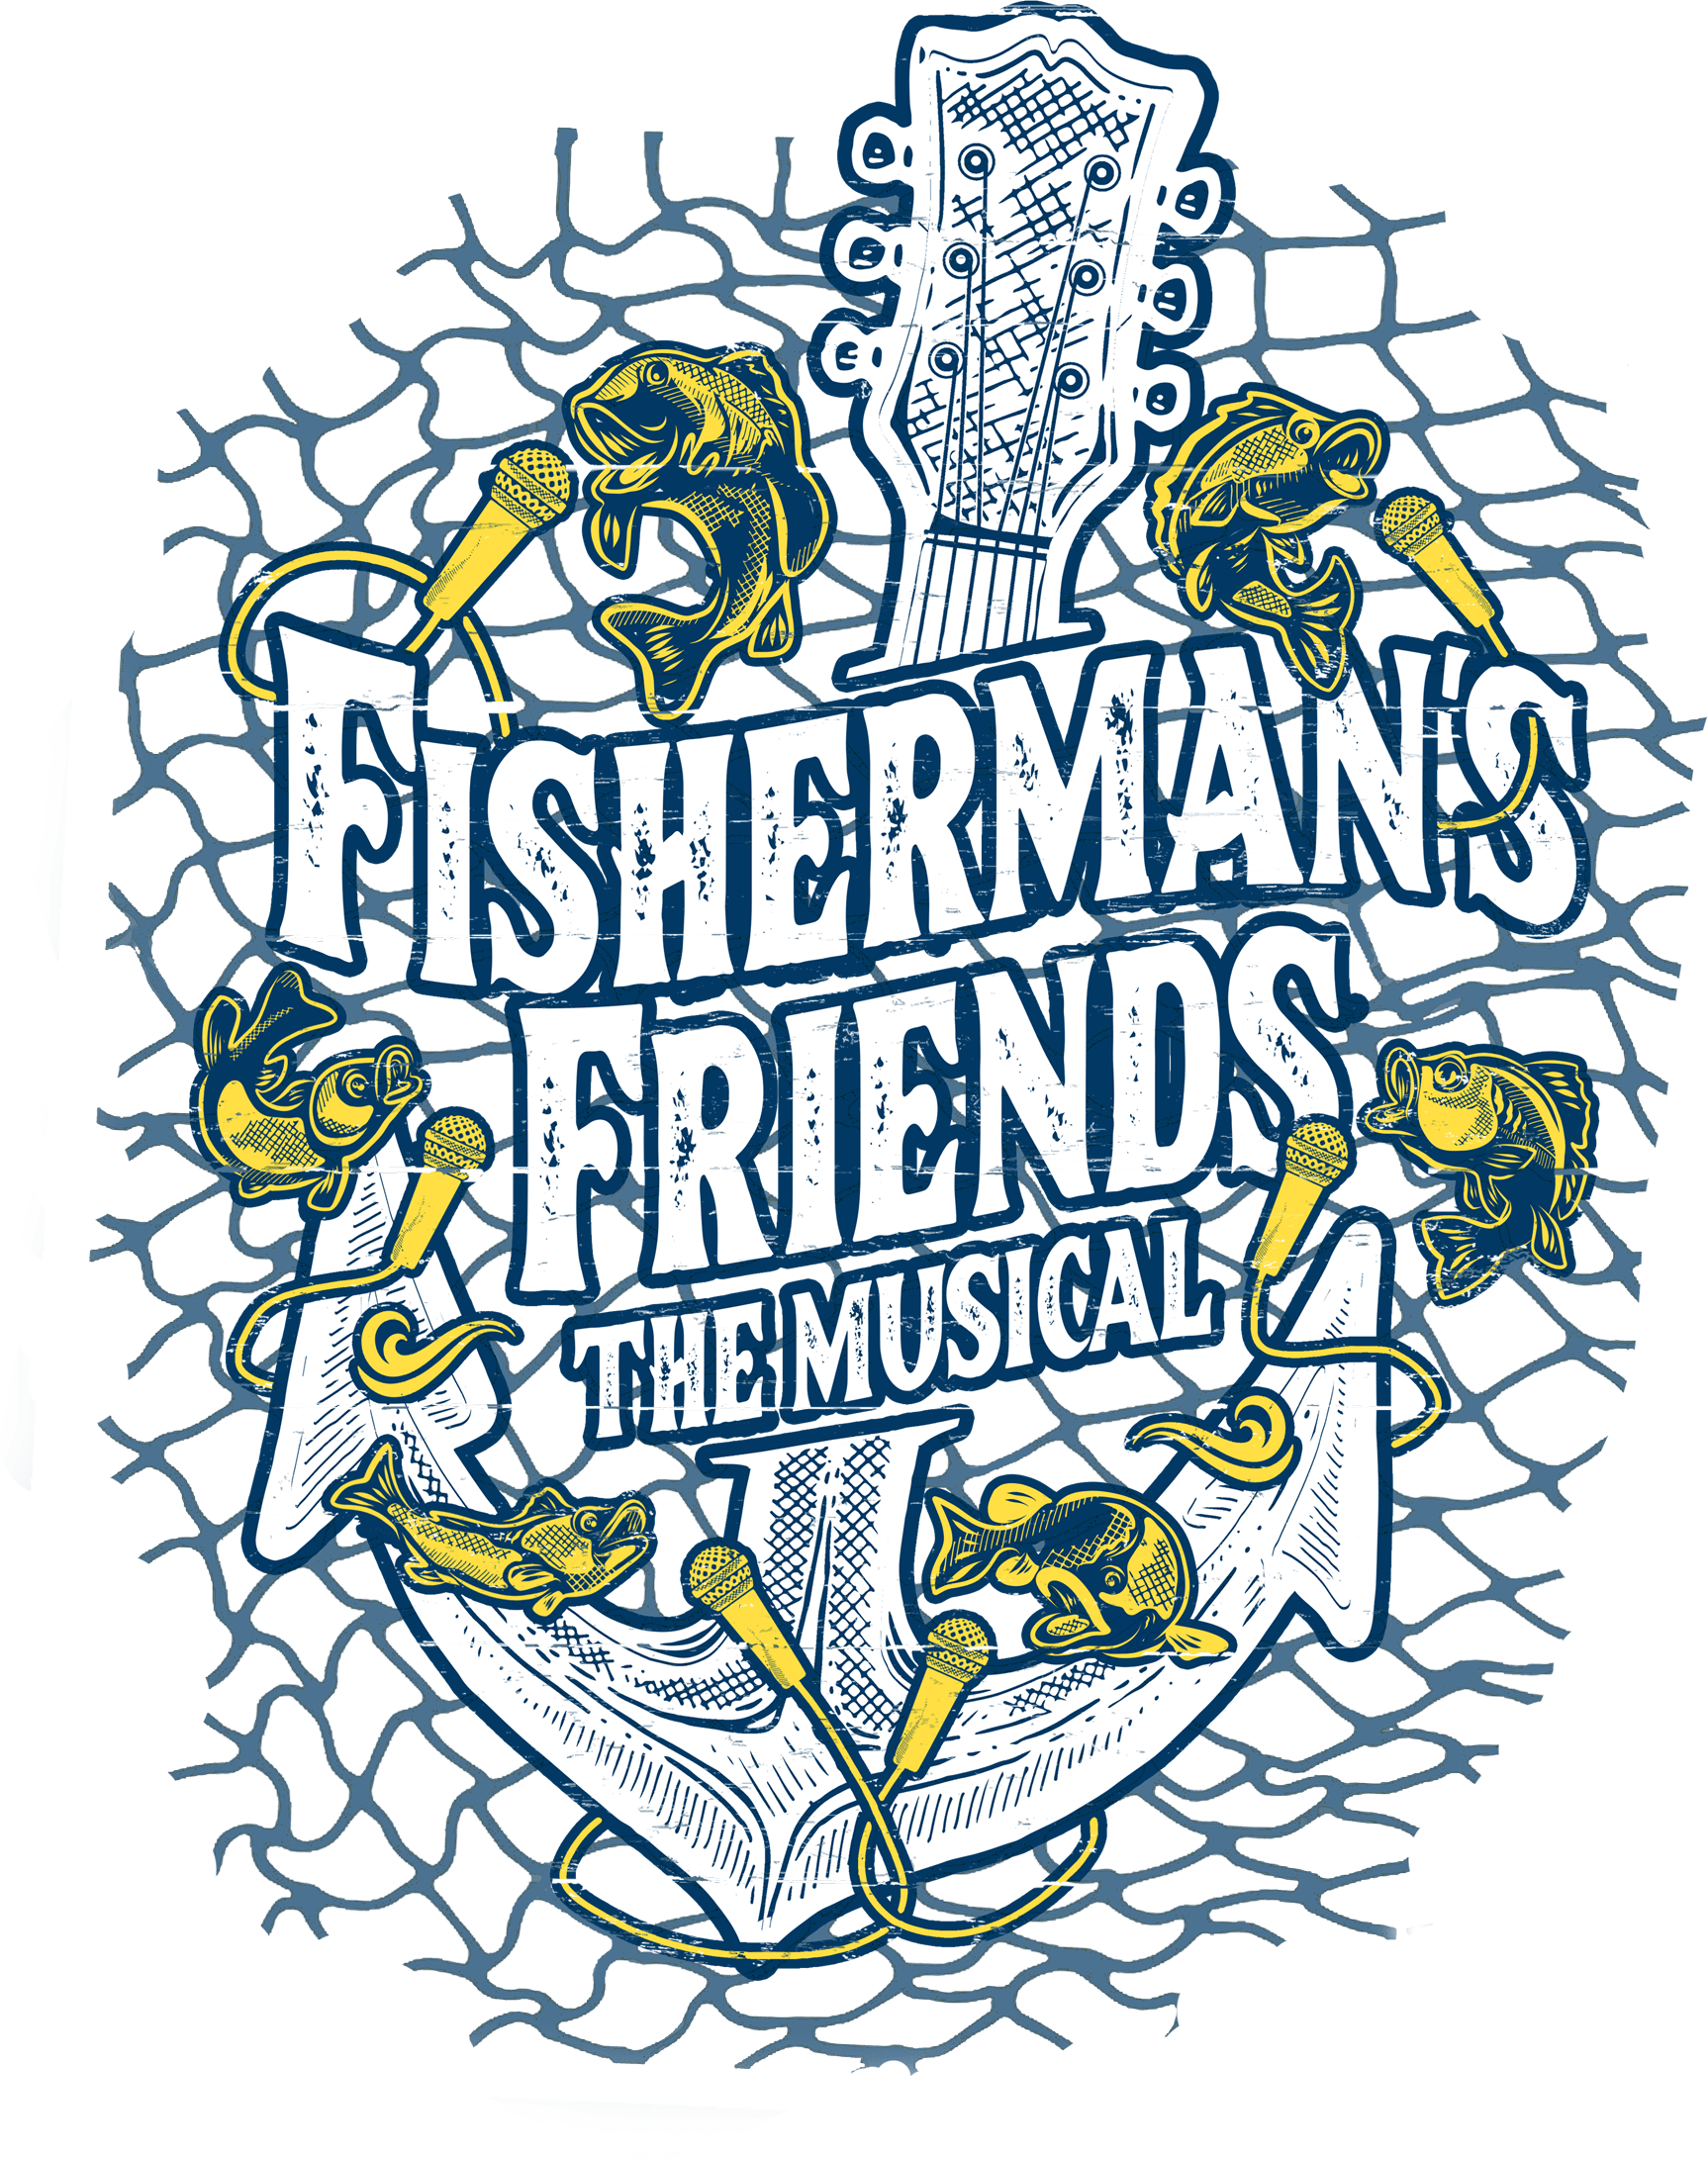 Fisherman's Friends The Musical